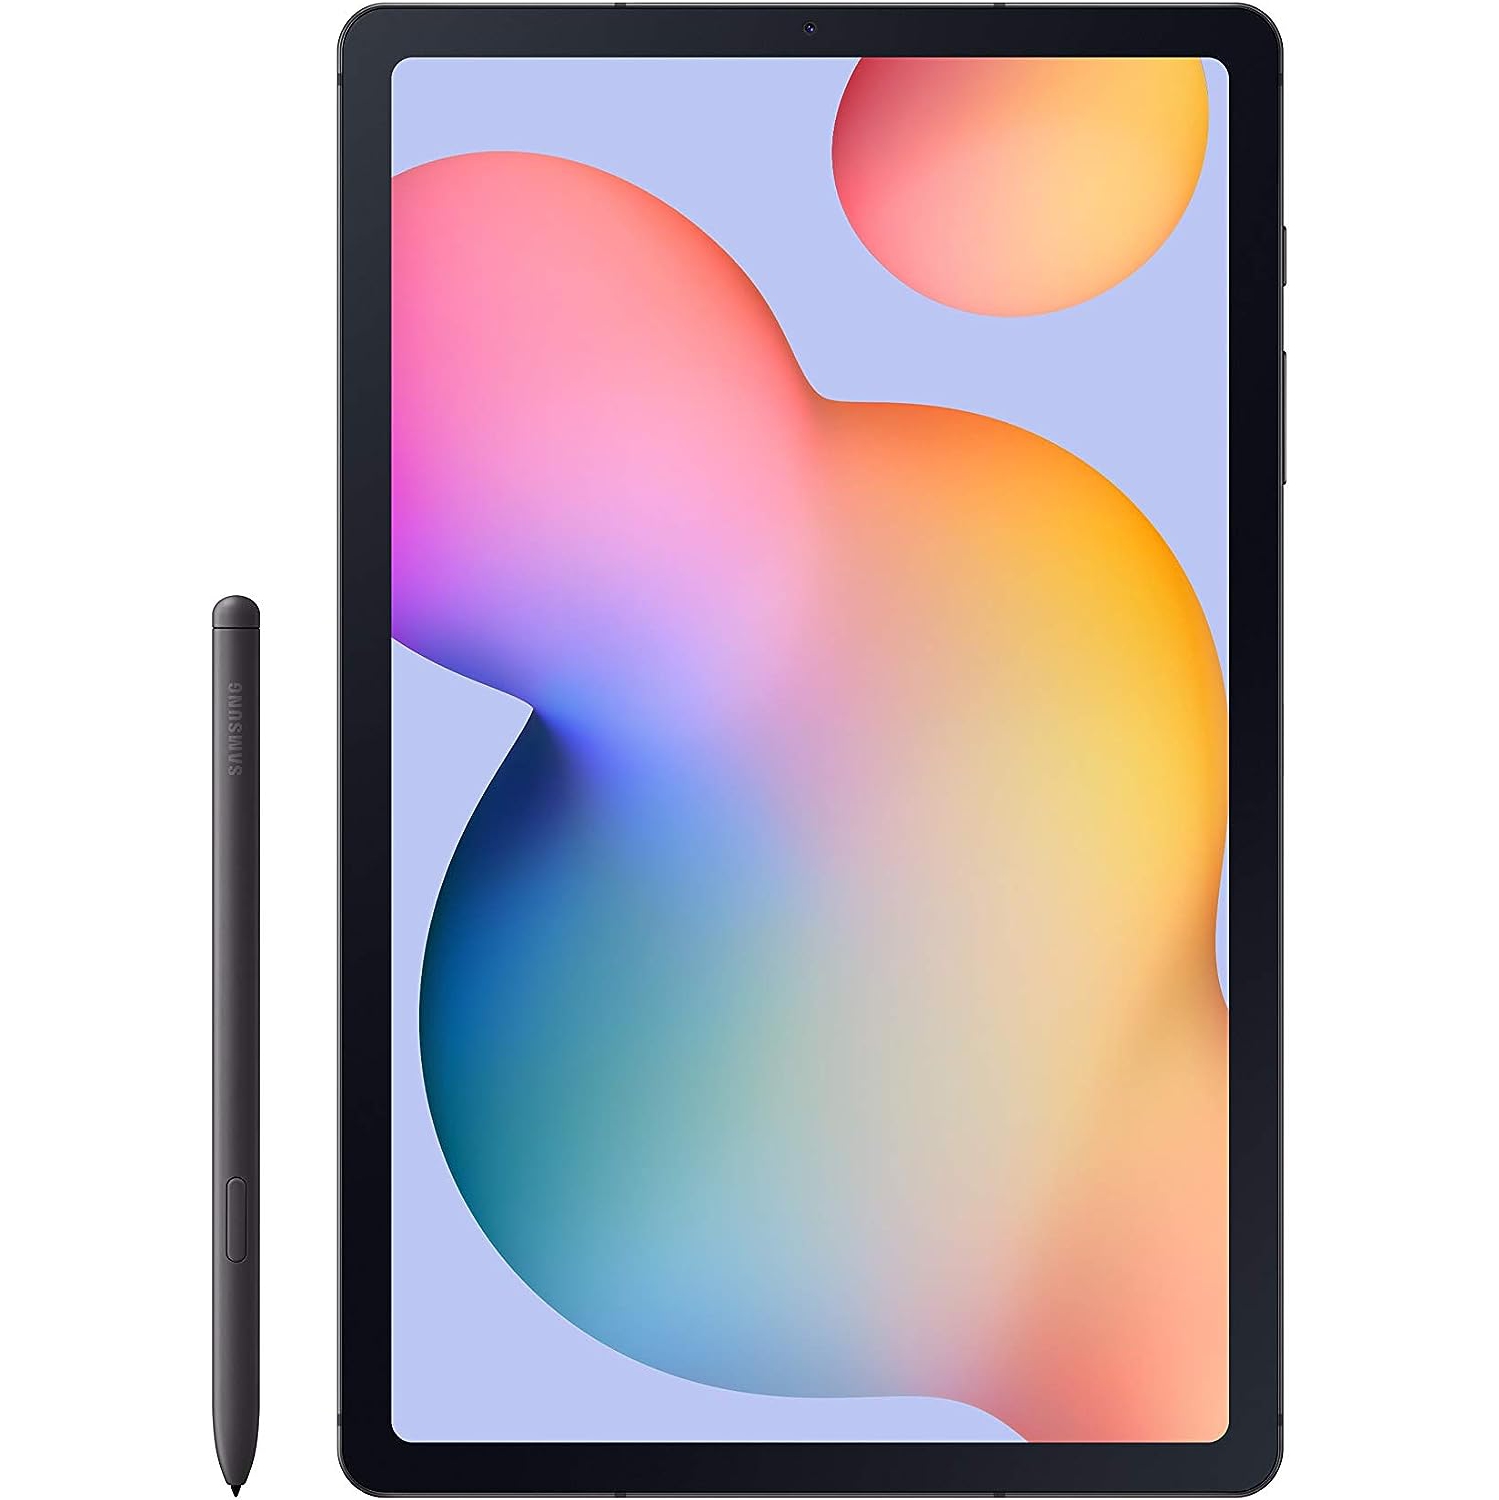 Samsung Galaxy Tab S6 Lite (2022)| 10.4" - 64GB - Android 12 Tablet with Snapdragon - 720G 8-Core Processor - Oxford Grey – New